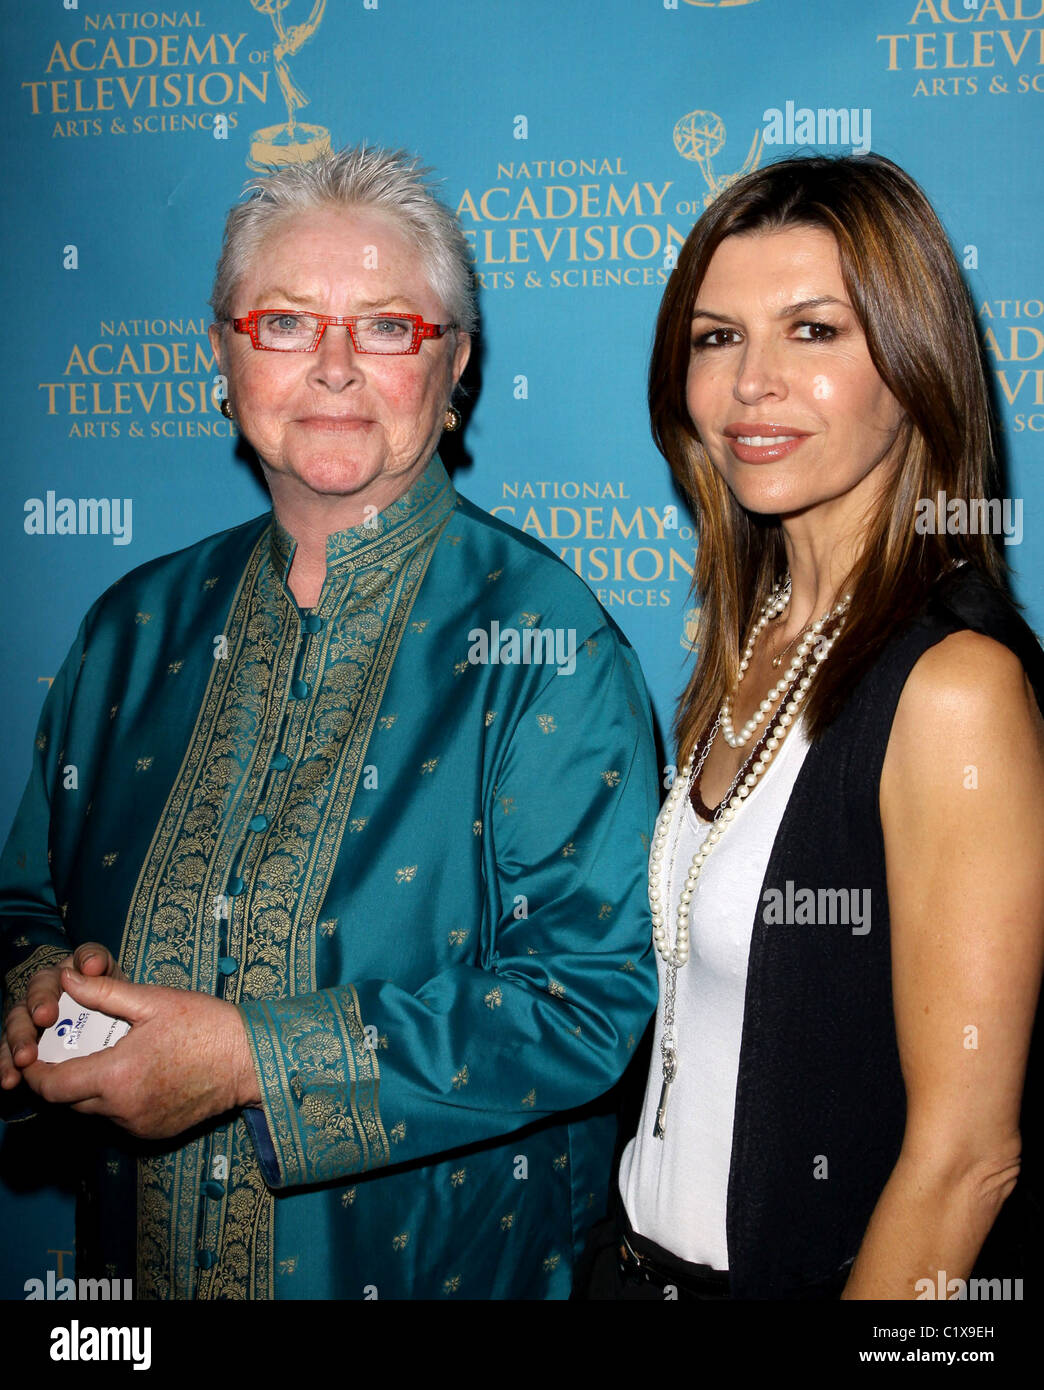 Susan Flannery and Finola Hughes The 36th Annual Daytime Creative Arts Emmy Awards held at the Westin Bonaventure Hotel - Stock Photo